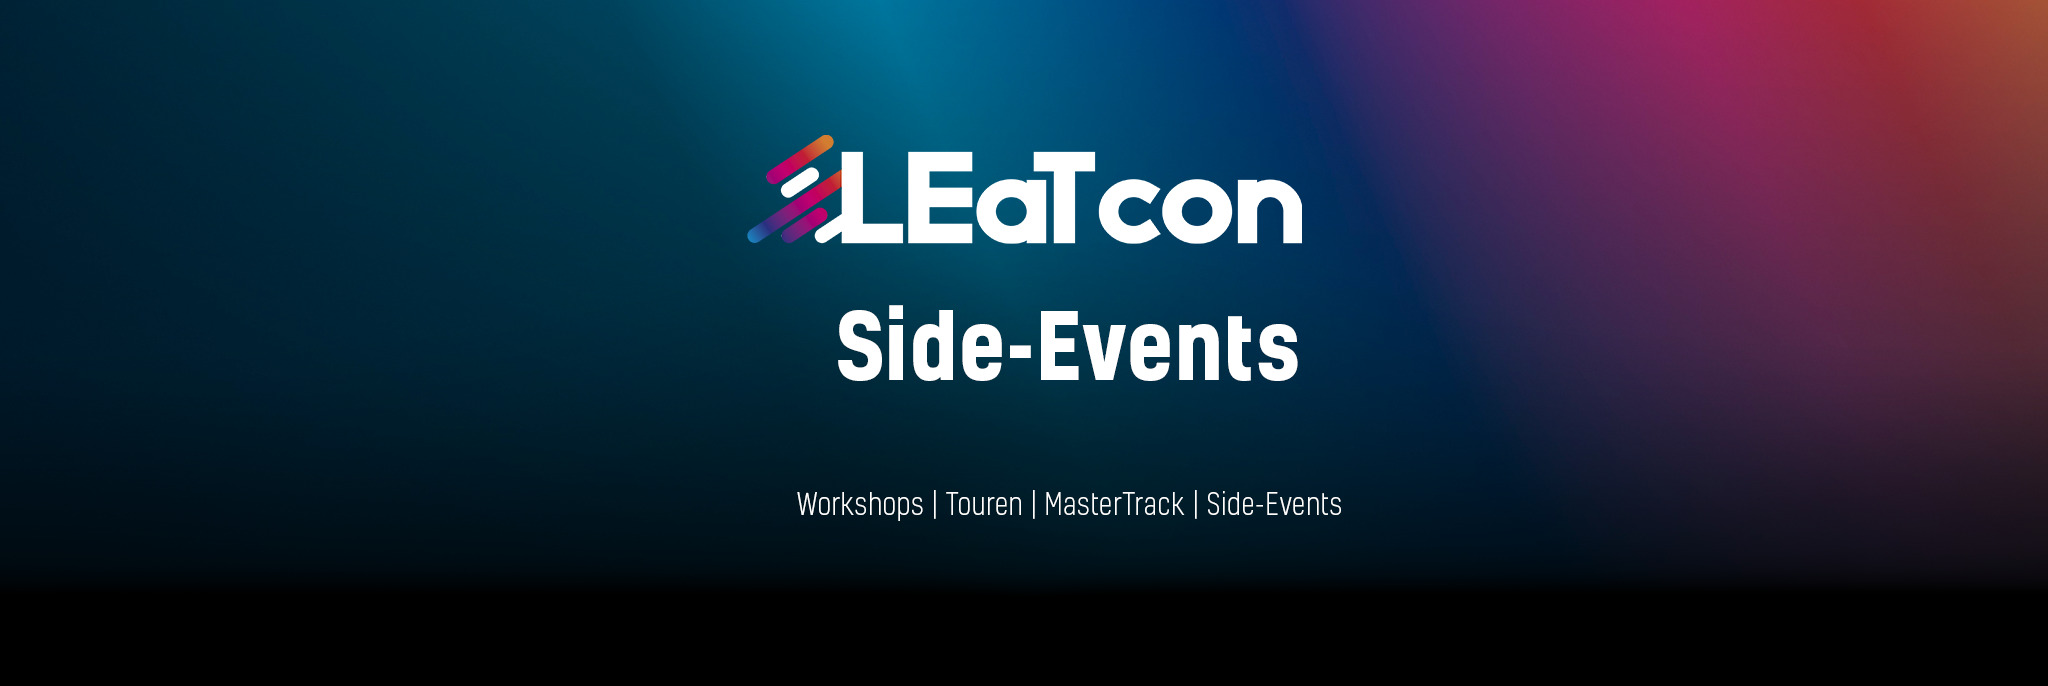 LEat con Side-Events